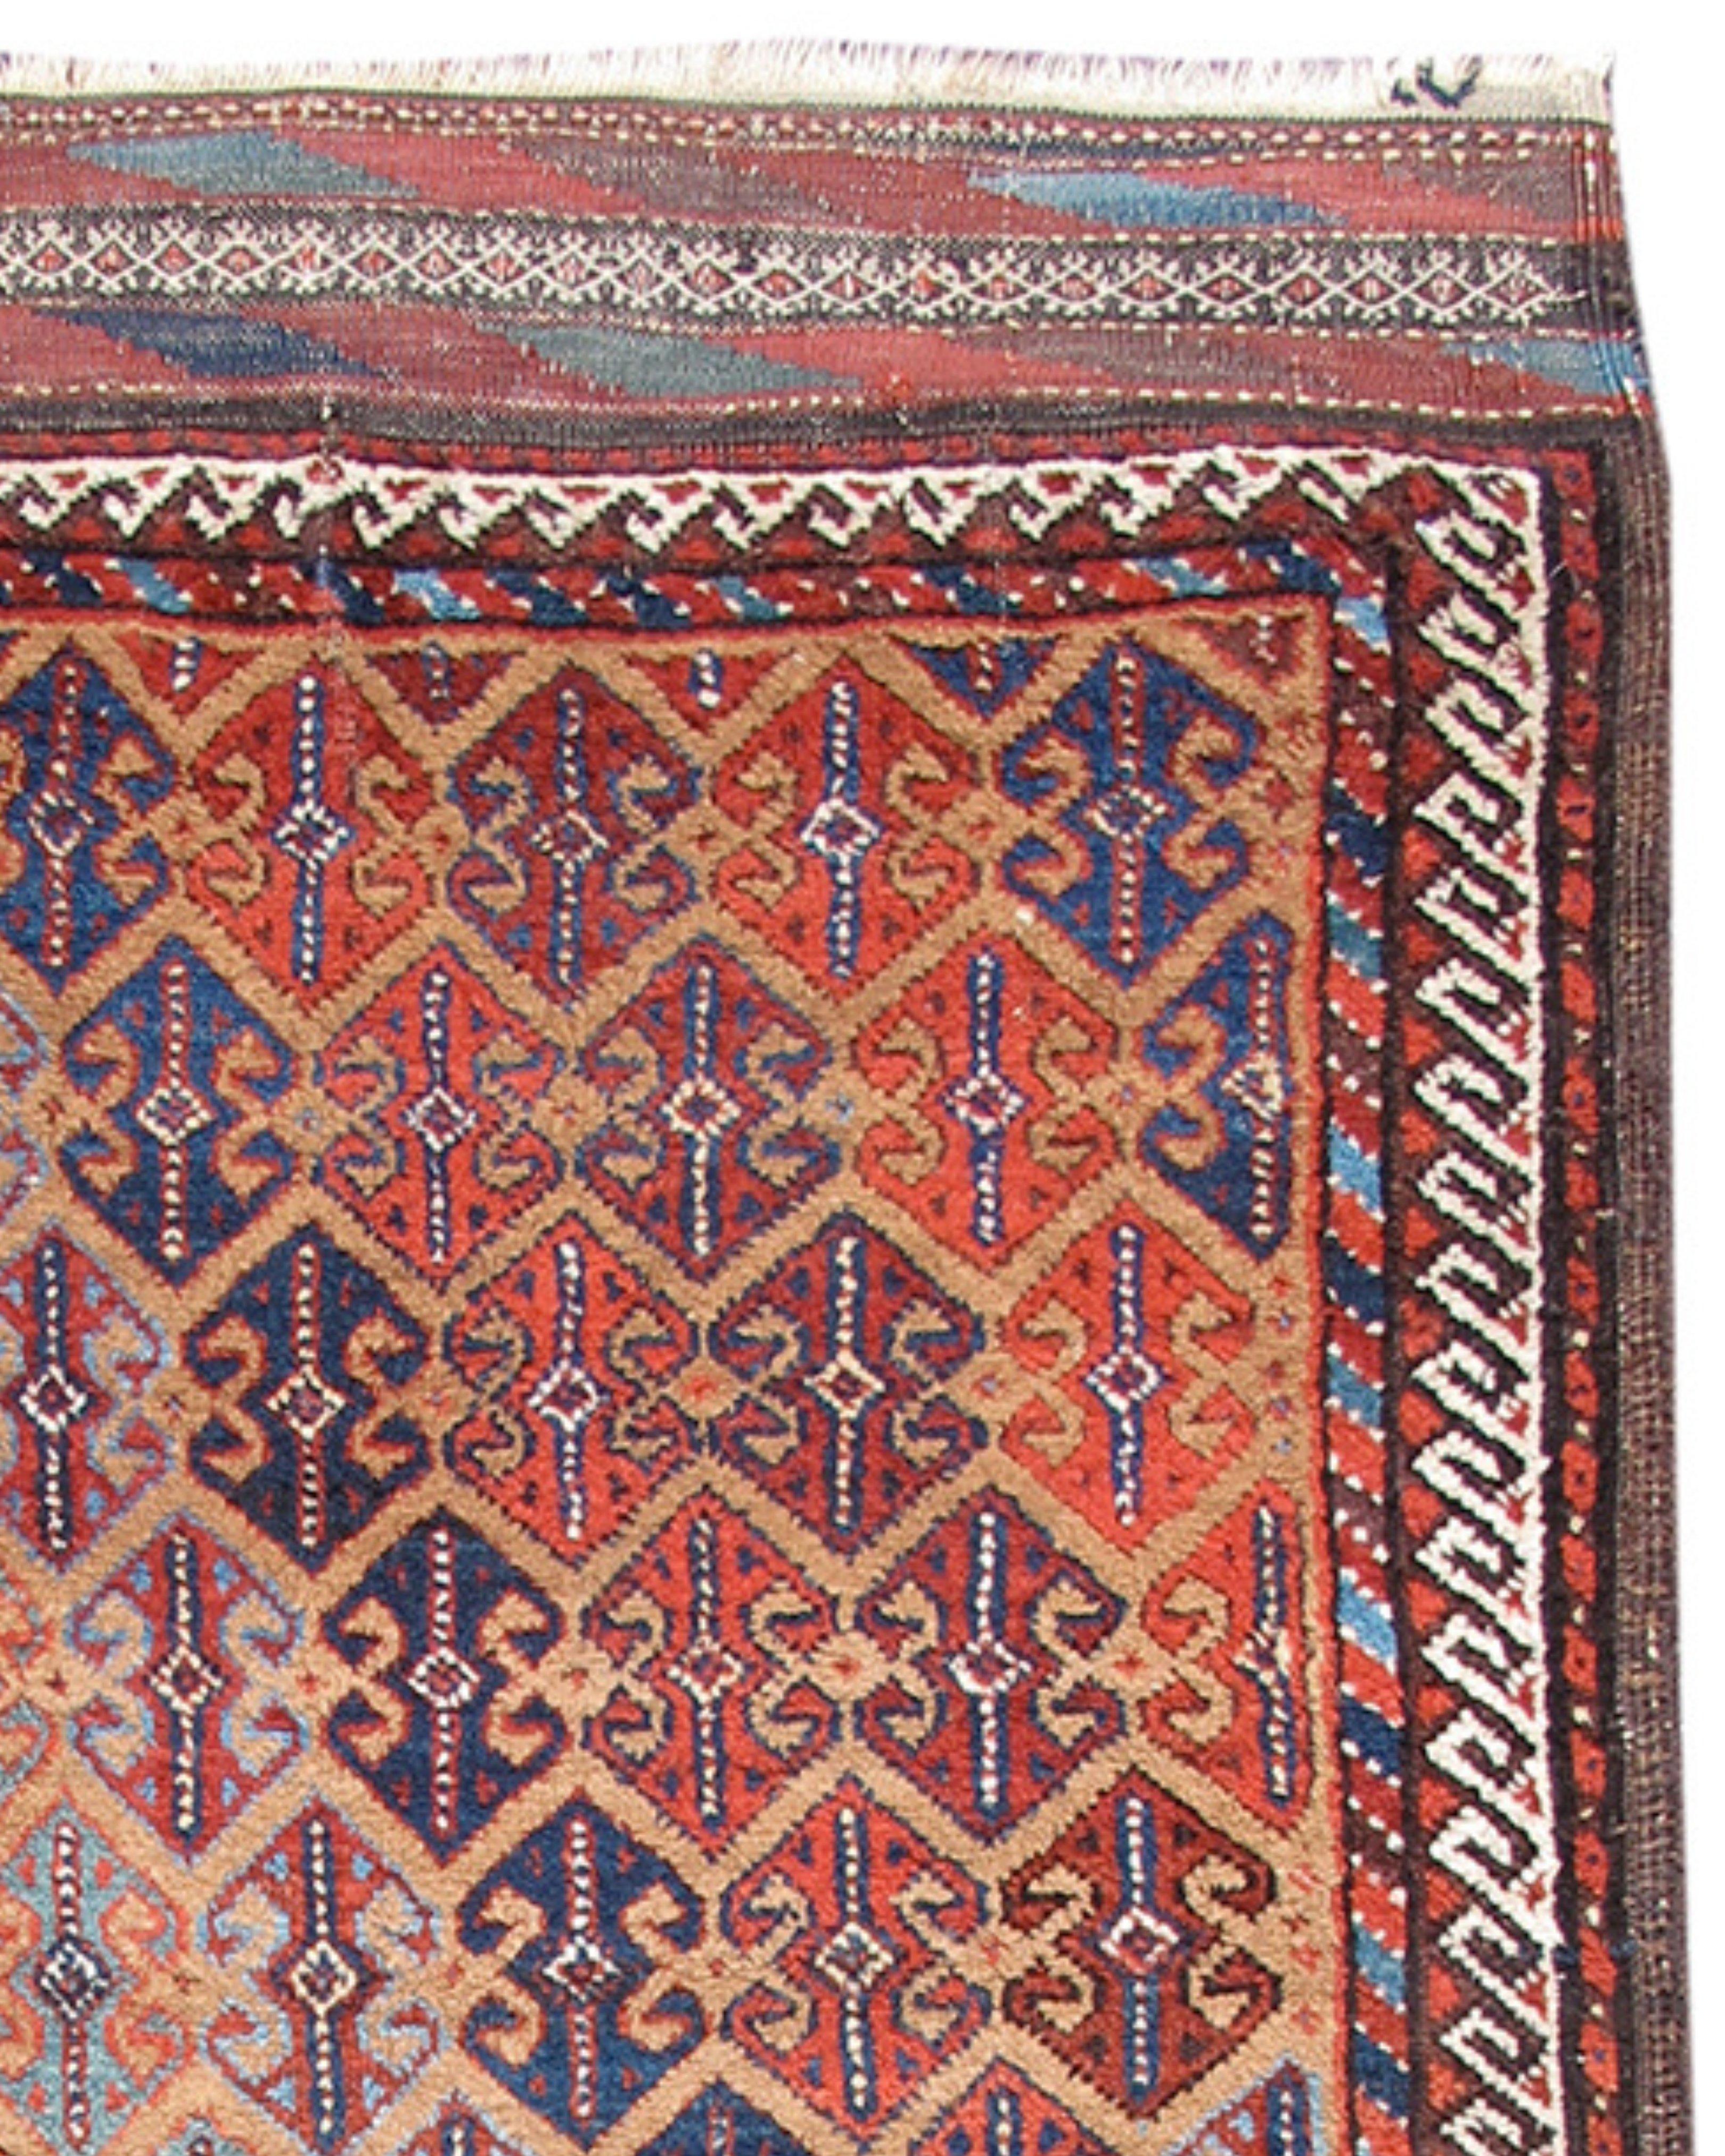 Antique PersianBaluch Rug, c. 1900

This vividly colored Baluch rug combines two very characteristically Baluchi themes that are very seldom seen in the same weaving: a camel ground with an all-over pattern of double-anchor ornament. Derived from